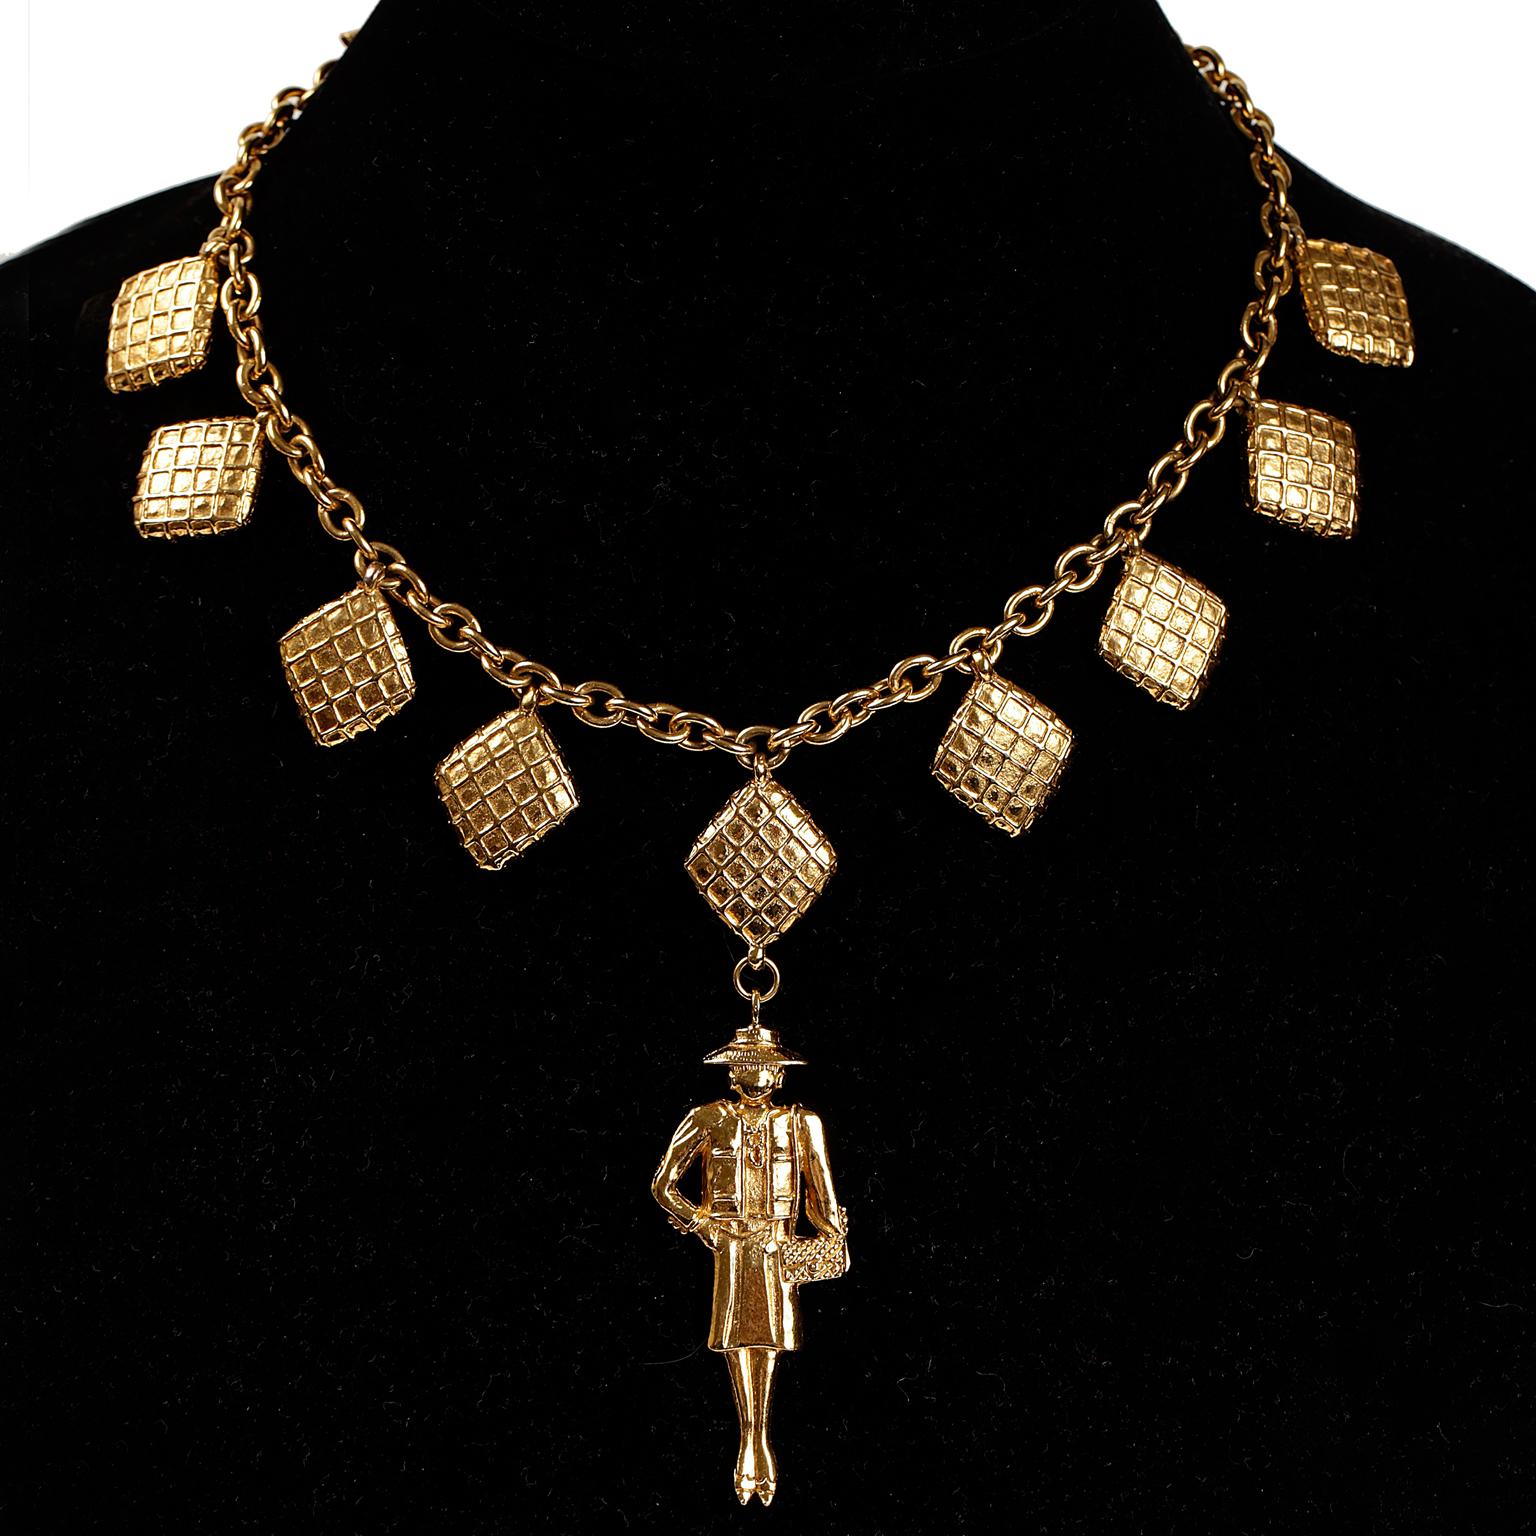 Chanel Gold Coco Pendant Necklace- excellent condition
Choker length gold chain with quilted charms.  Classically clad gold Coco charm dangles from the center.  Length fourteen inches. 

